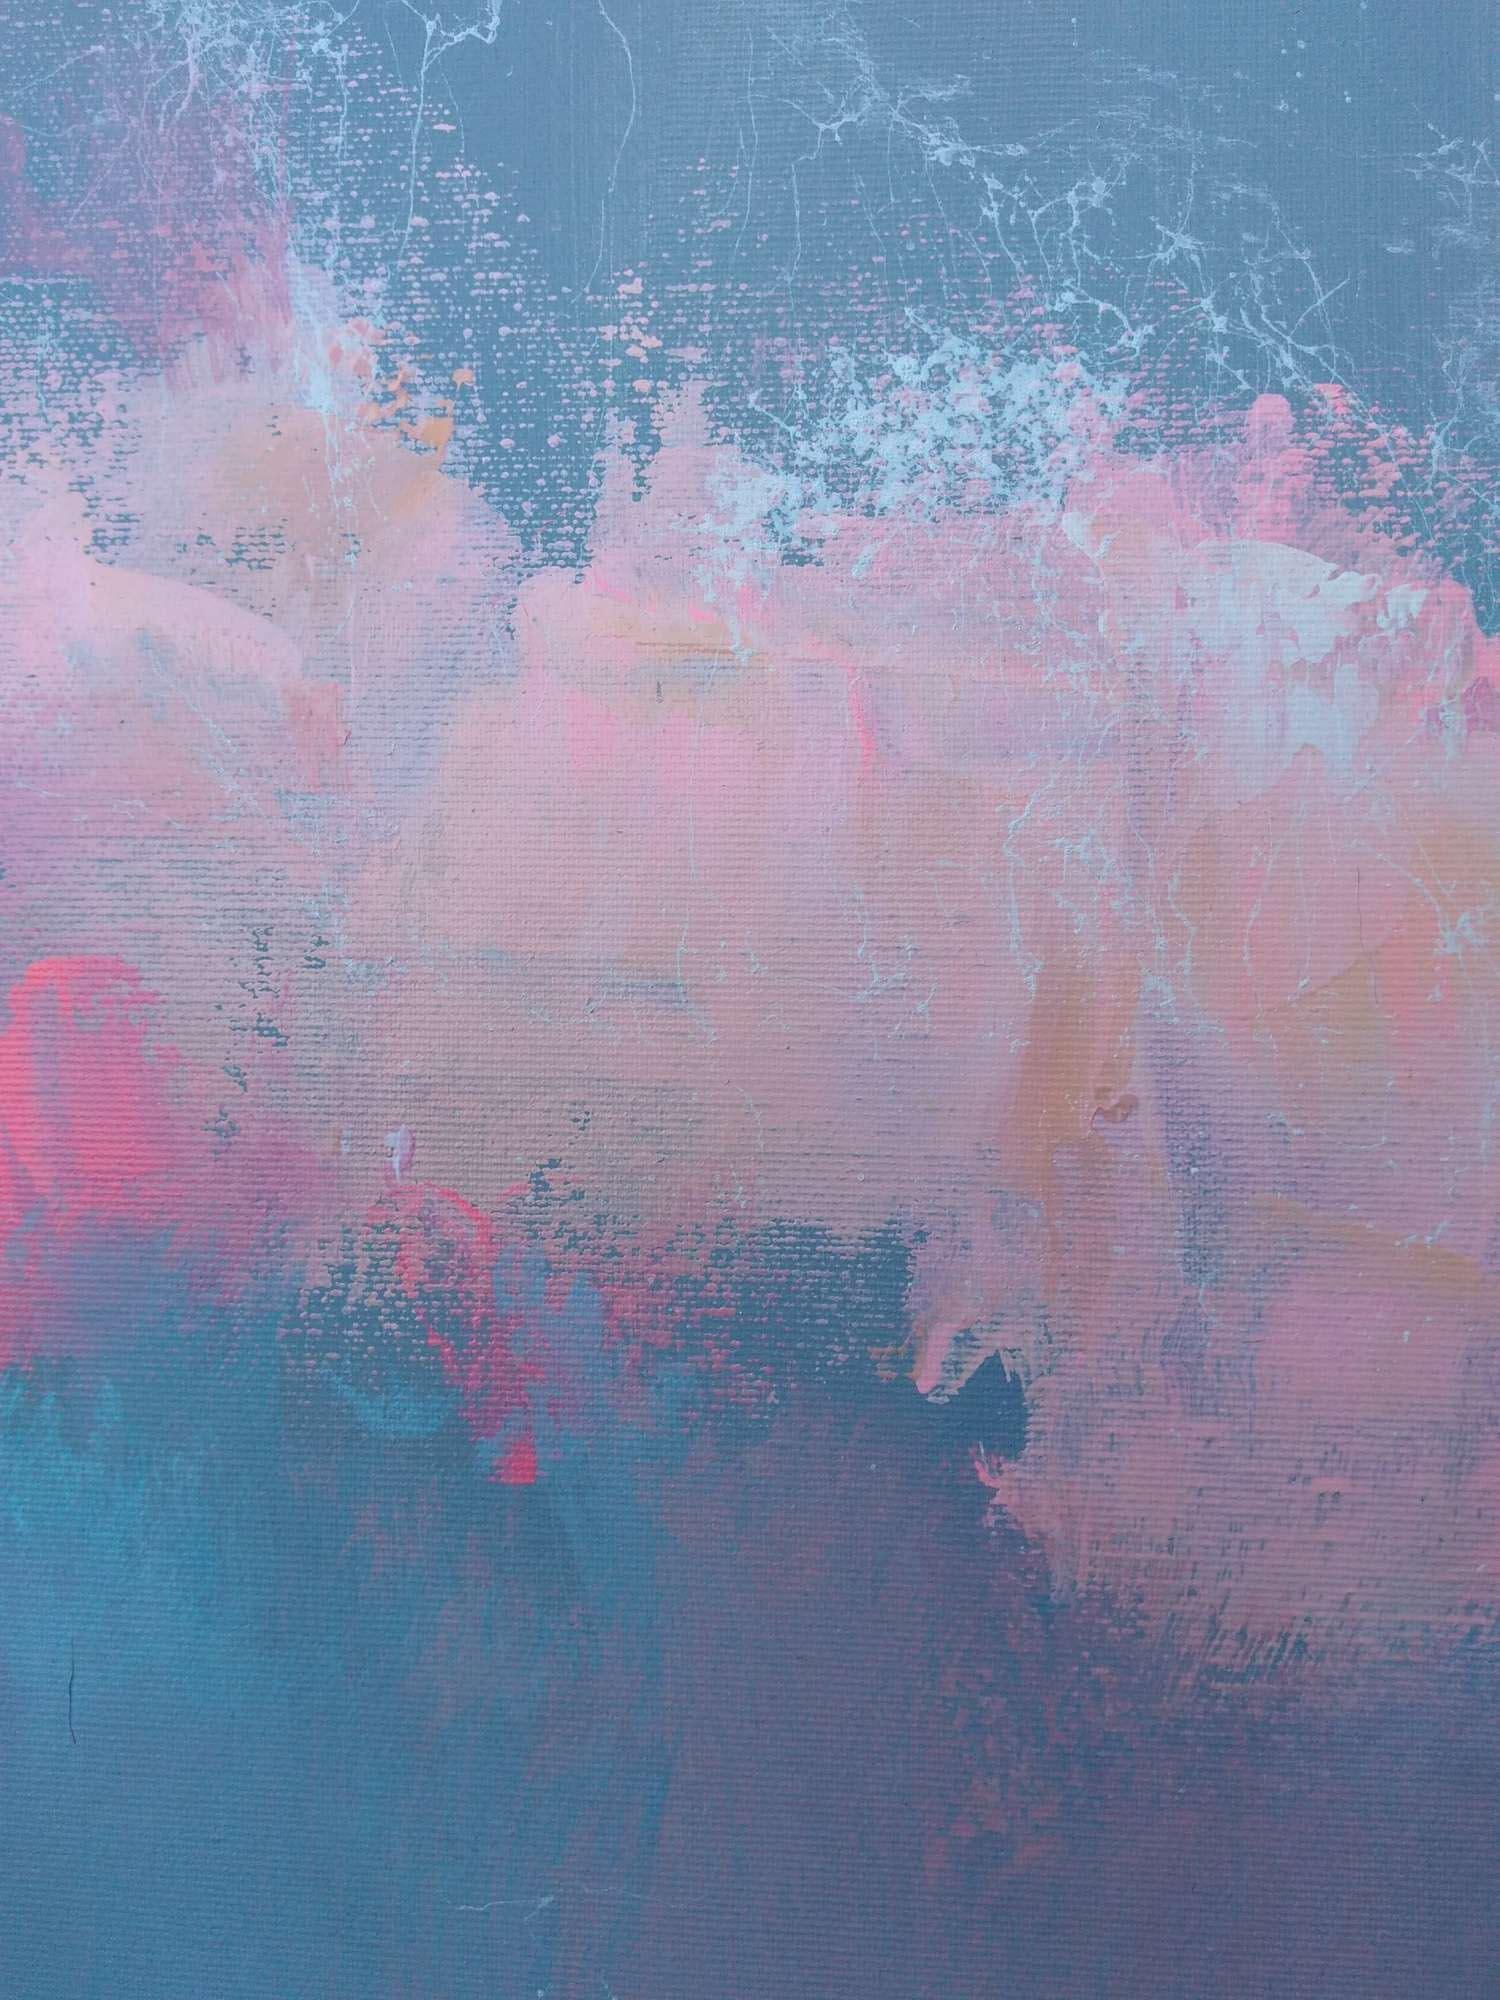 Fresh Perspectives 7, Blue and pink landscape painting - Gray Abstract Painting by Magdalena Morey